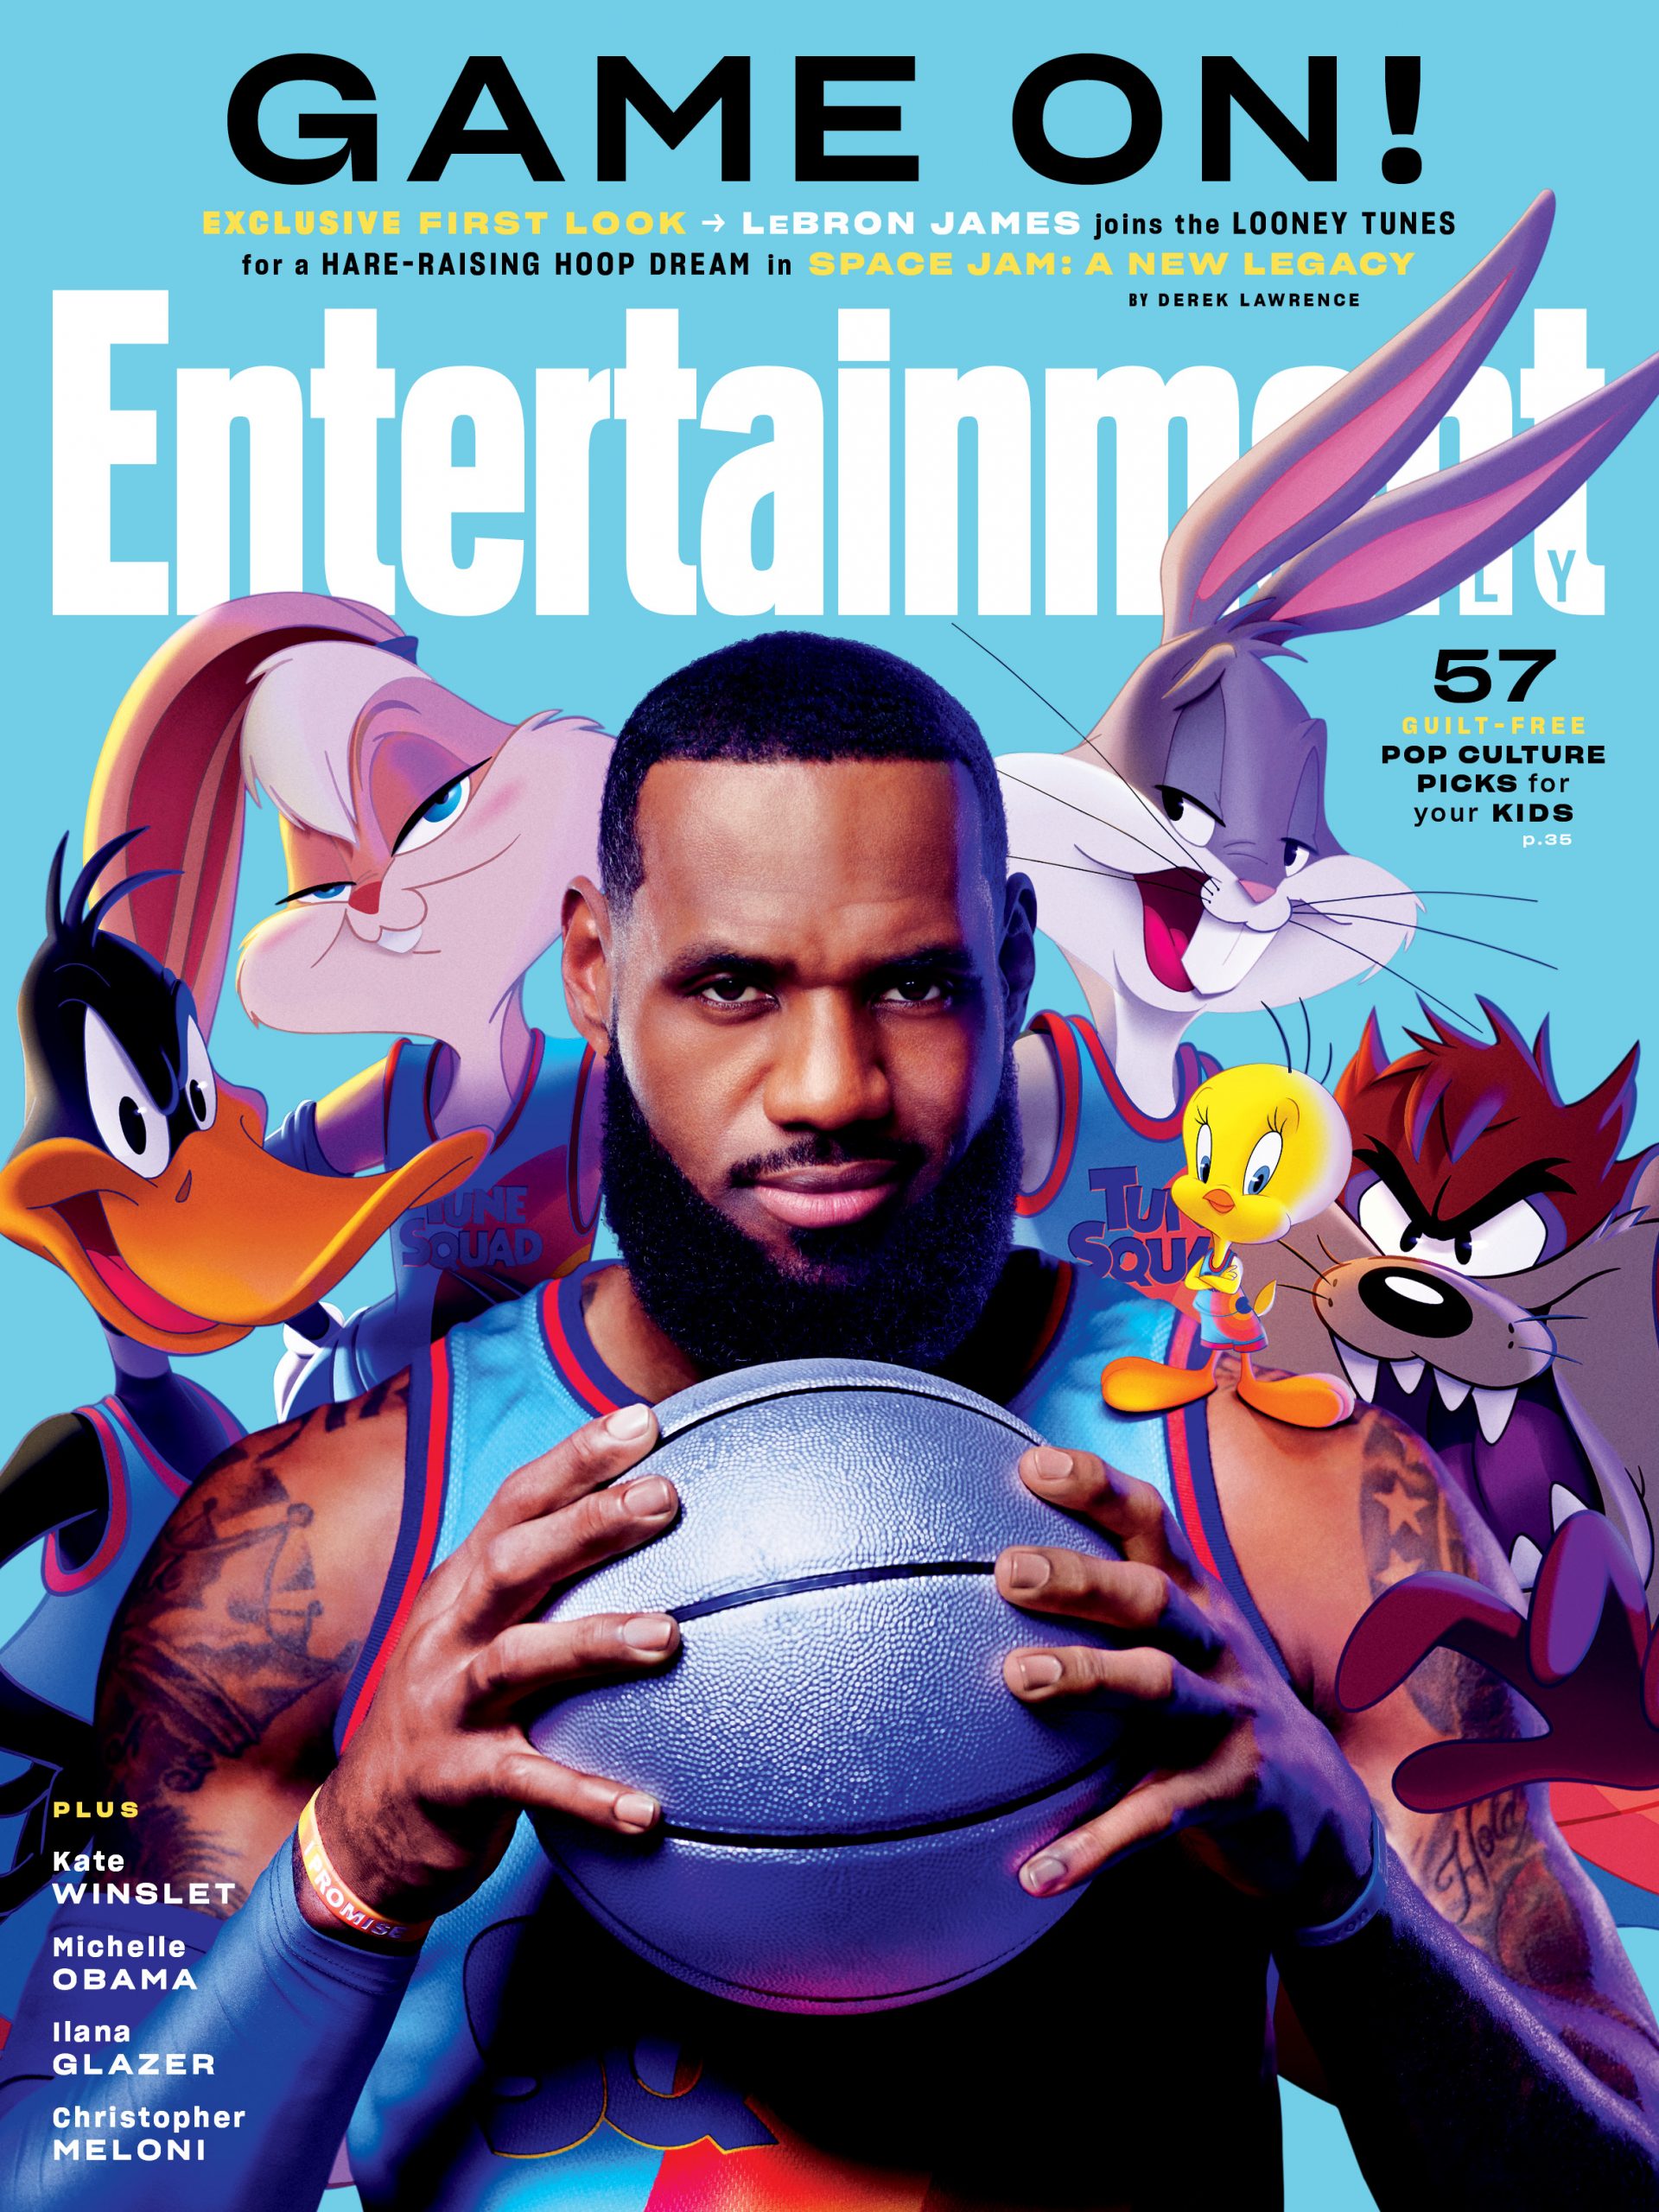 LeBron James Teases First Footage of Space Jam: A New Legacy